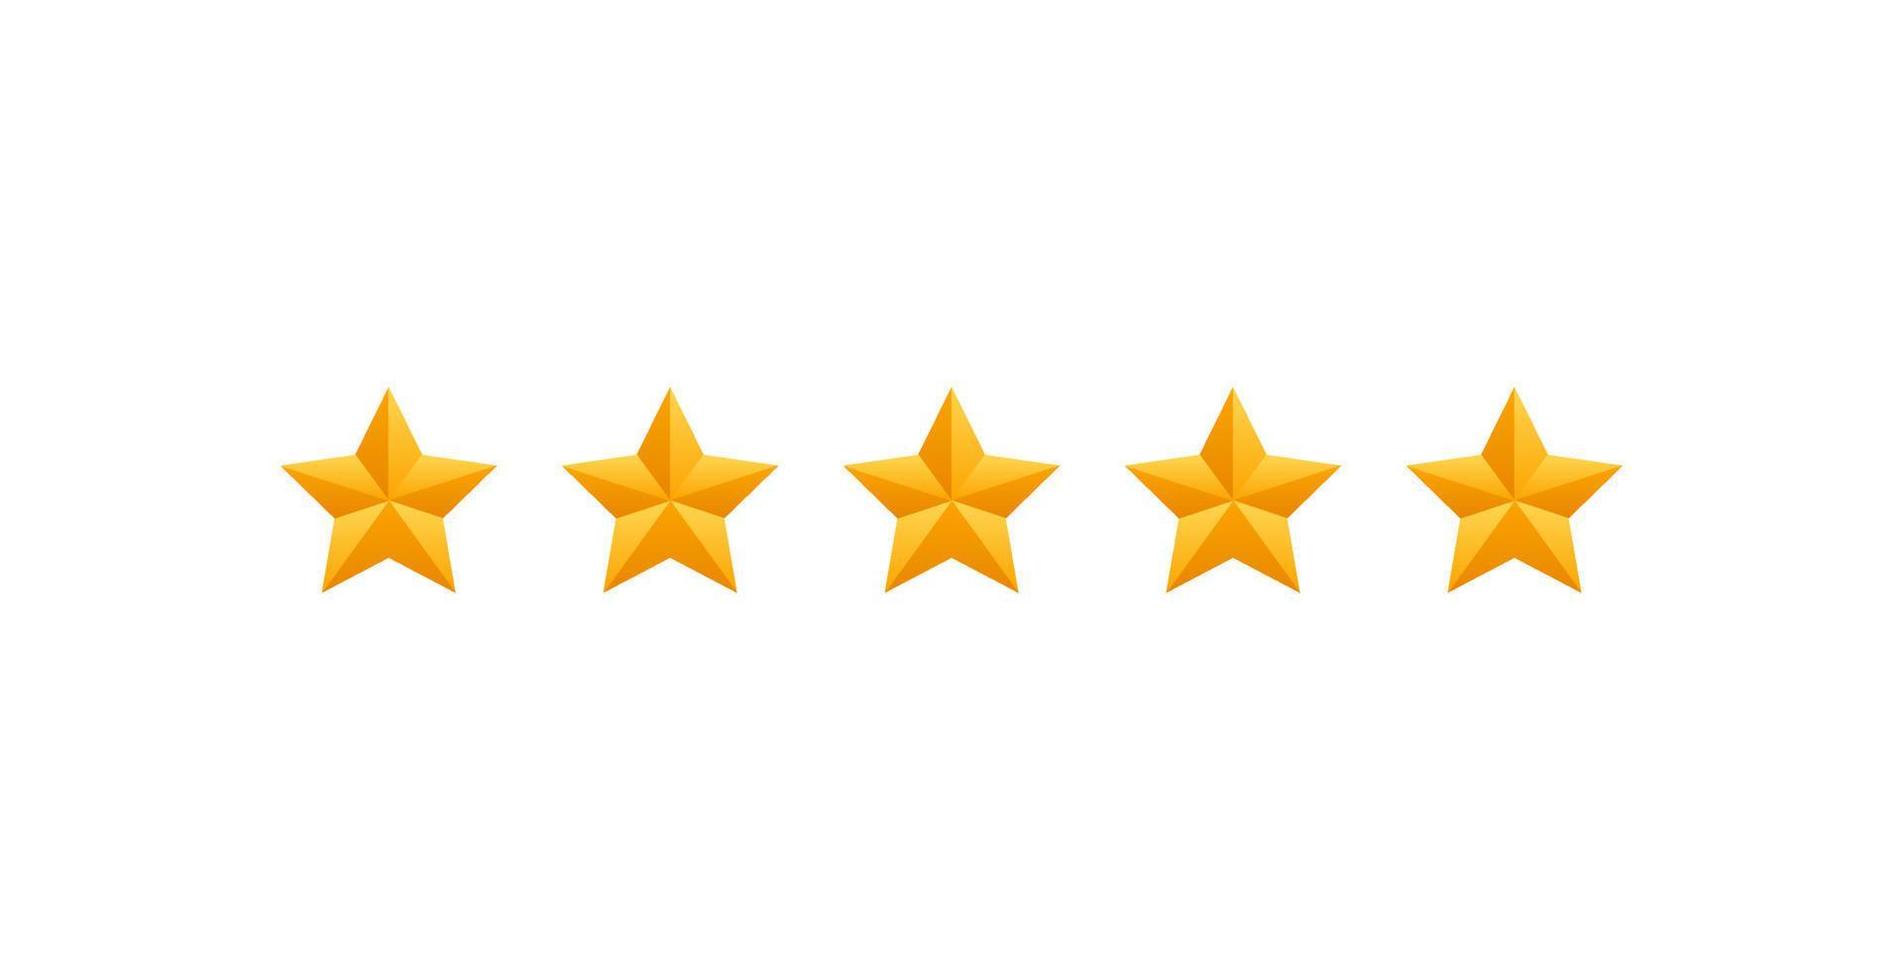 5 star review. Five gold stars icon - service rate or quality feedback sign. Flat style vector illustration.